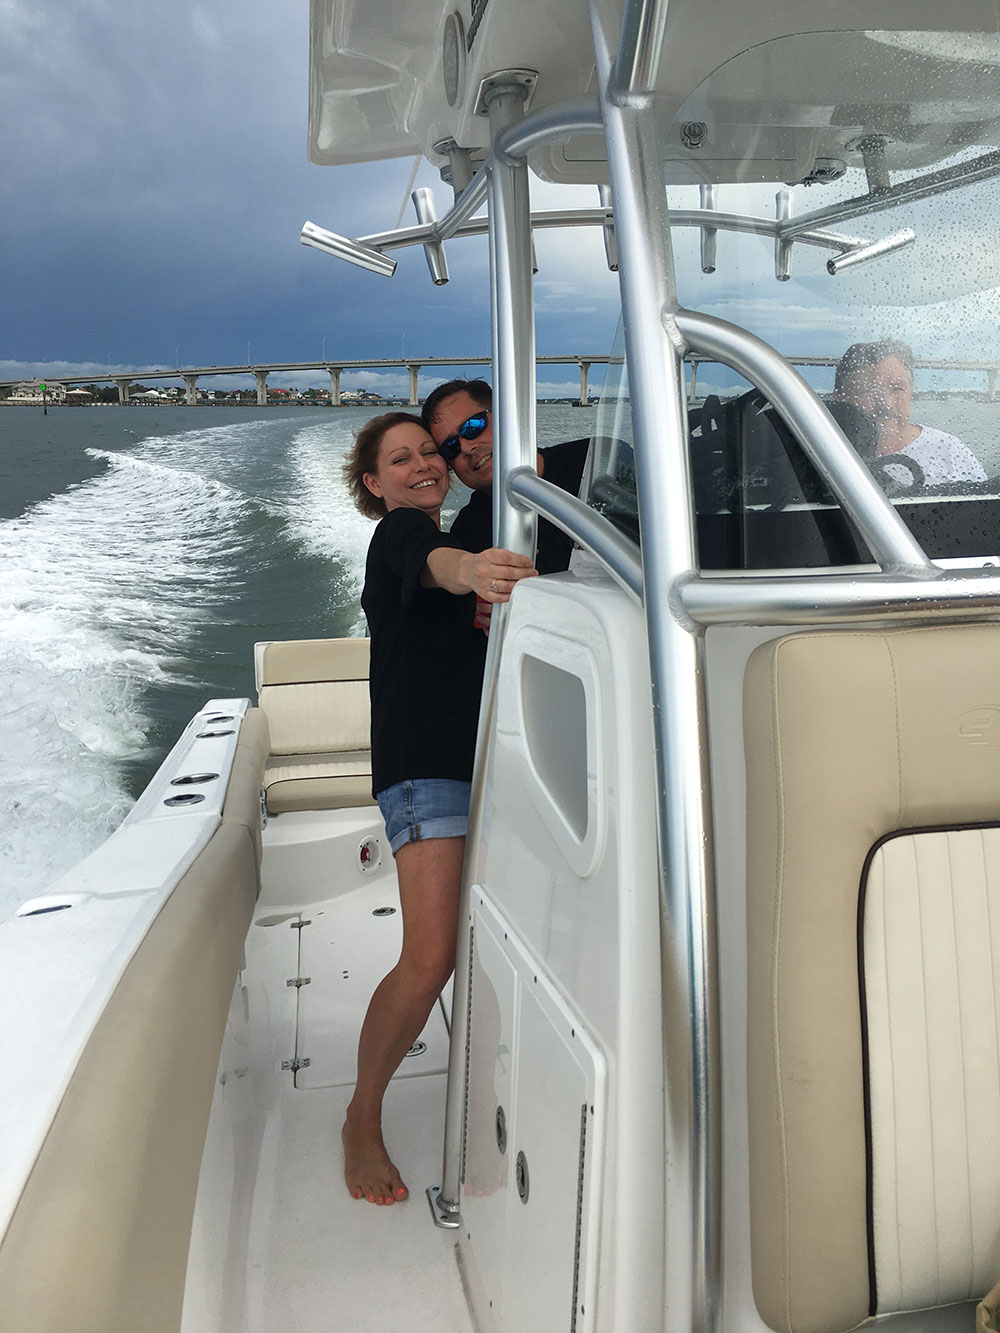 chris worth and his wife smiling on the boat in the intracoastal water